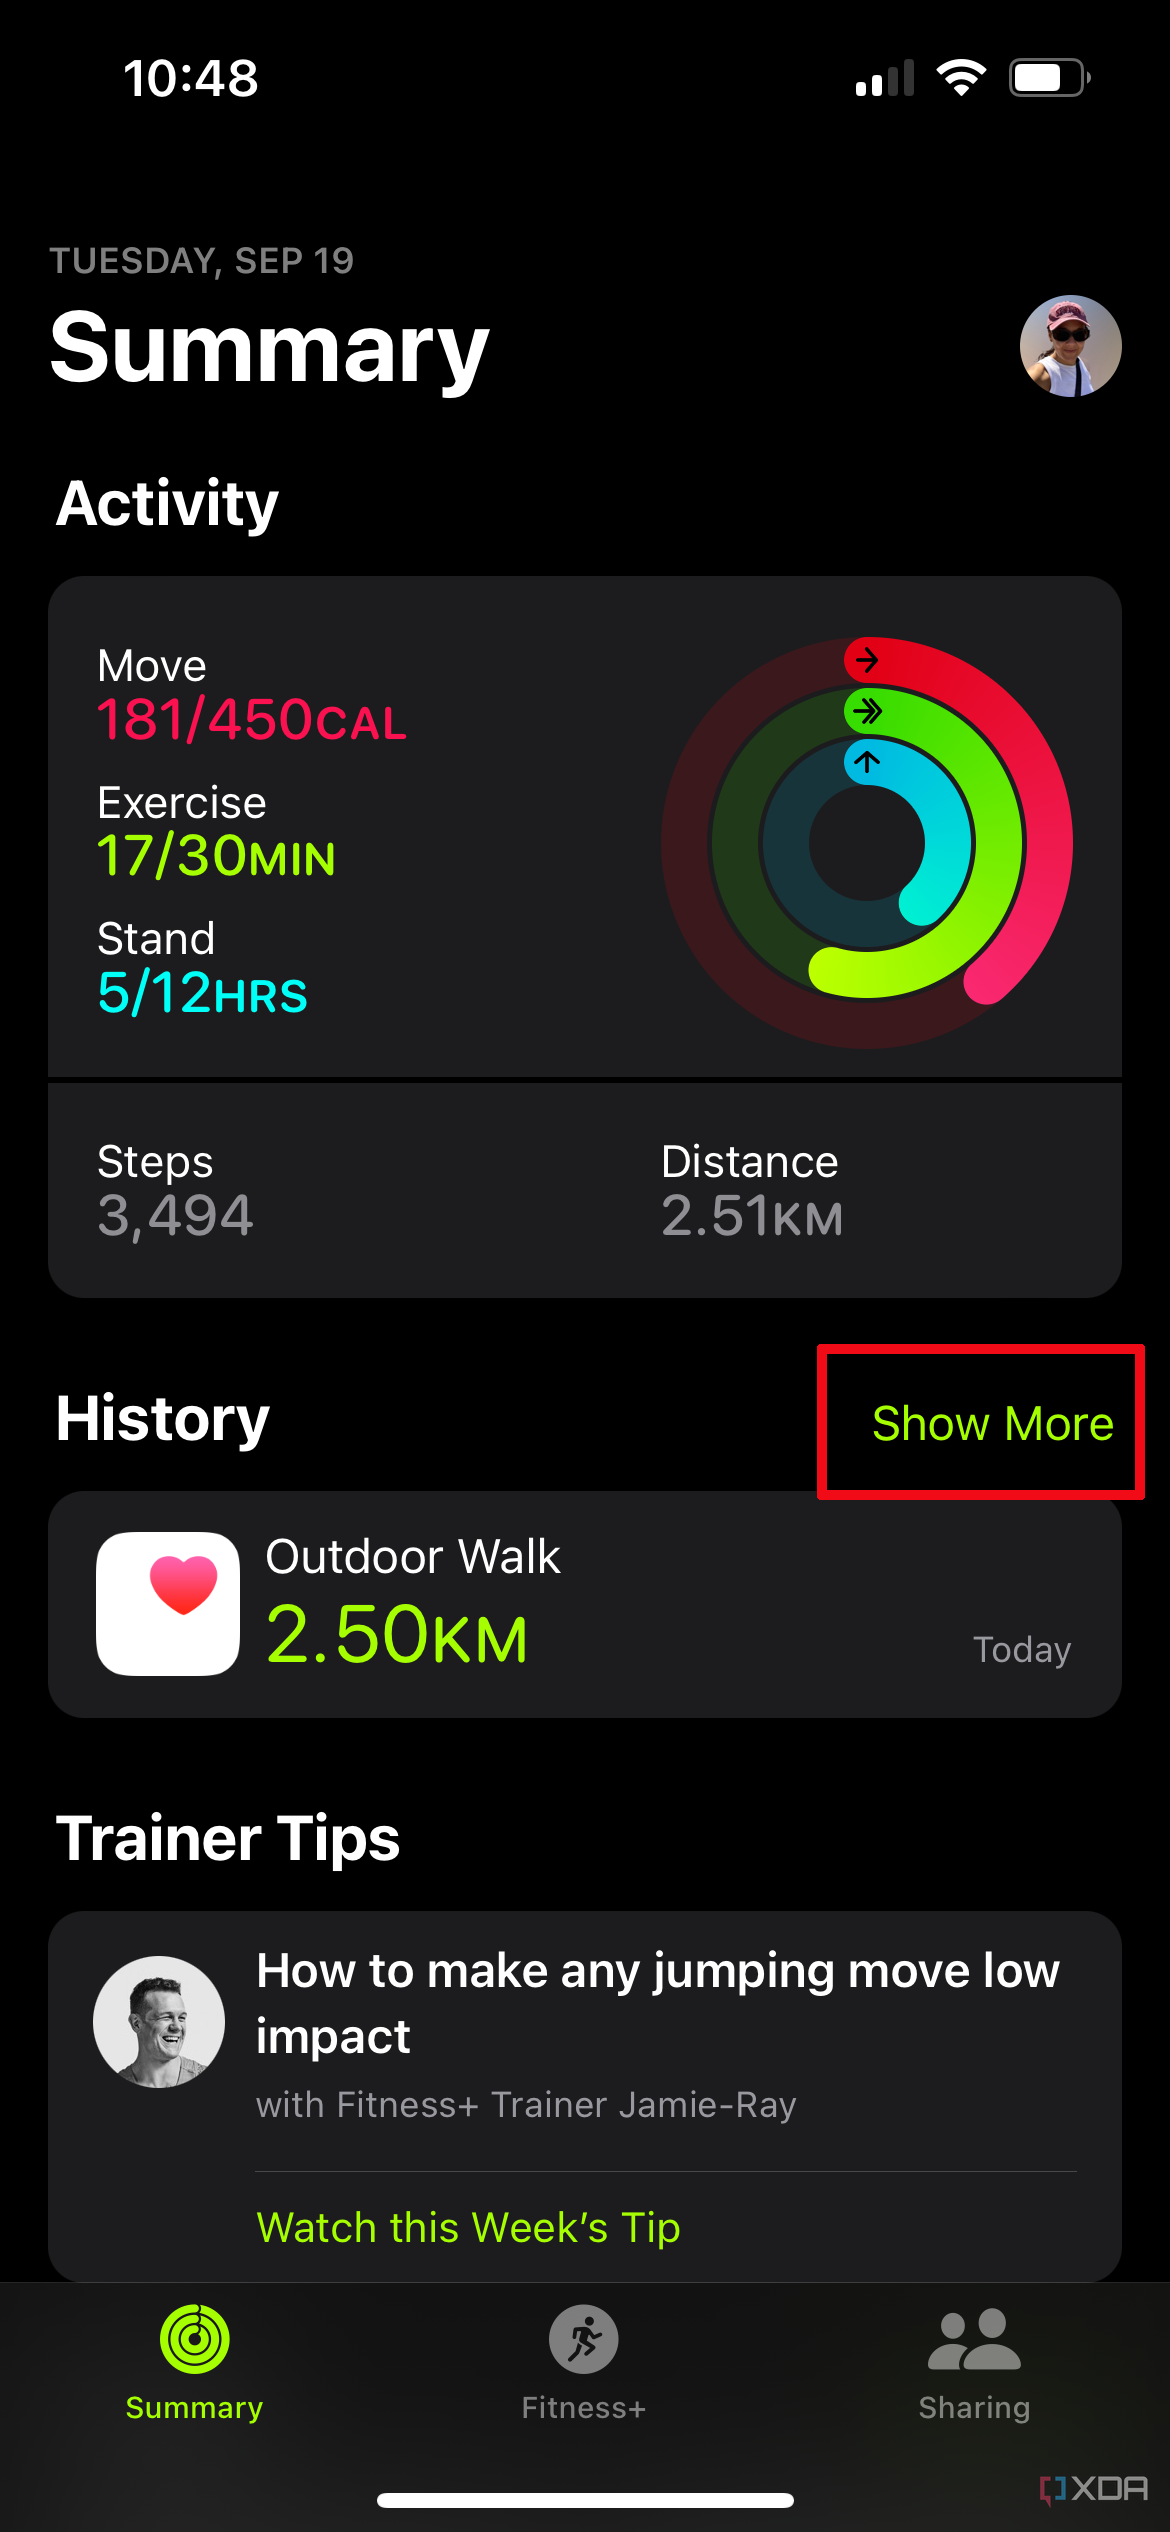 Apple Fitness app with the Summary page showing.